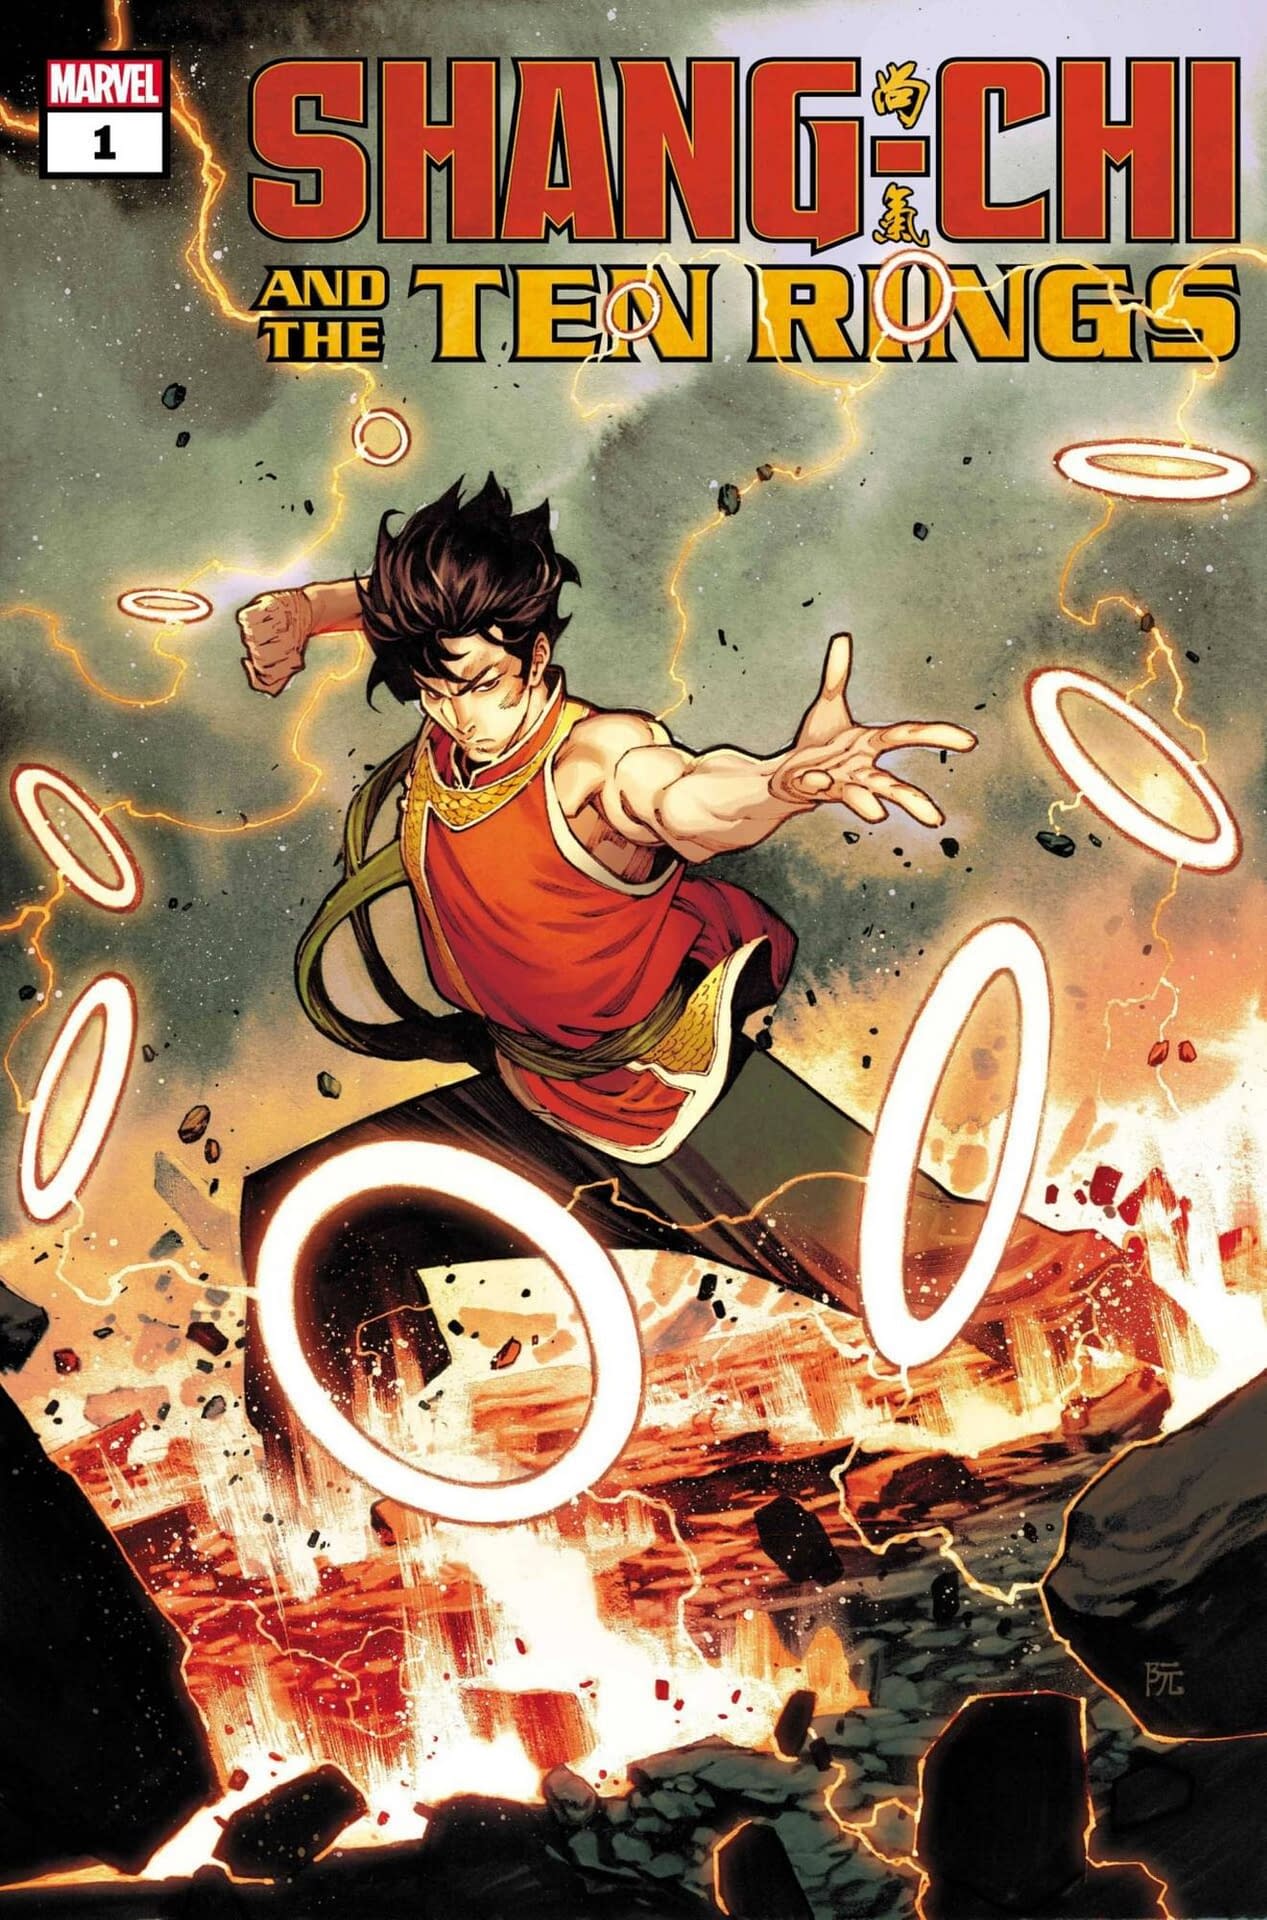 Marvel shang chi How to